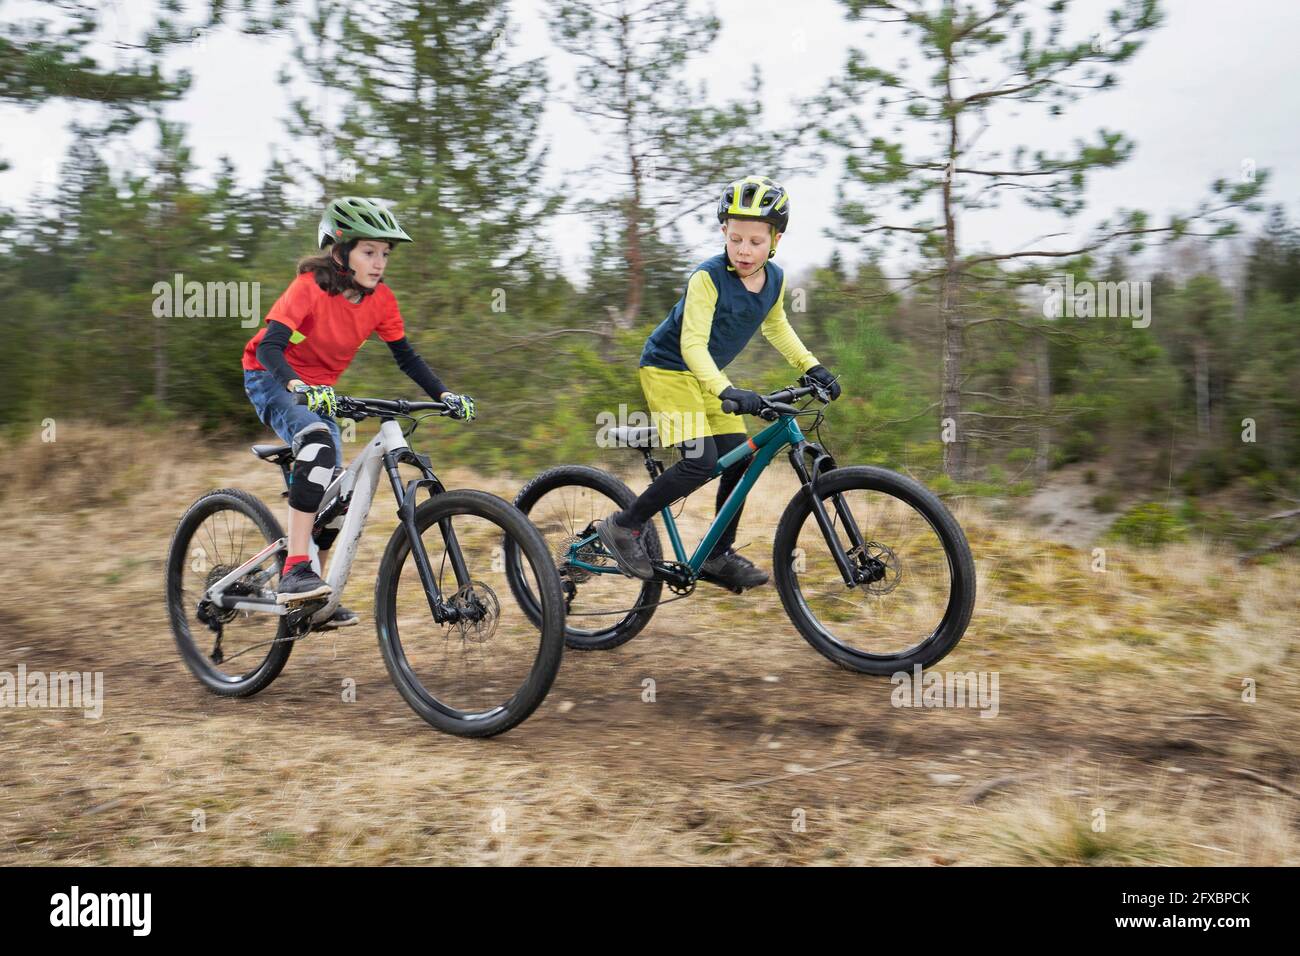 Brothers riding bicycle on dirt road in forest Stock Photo